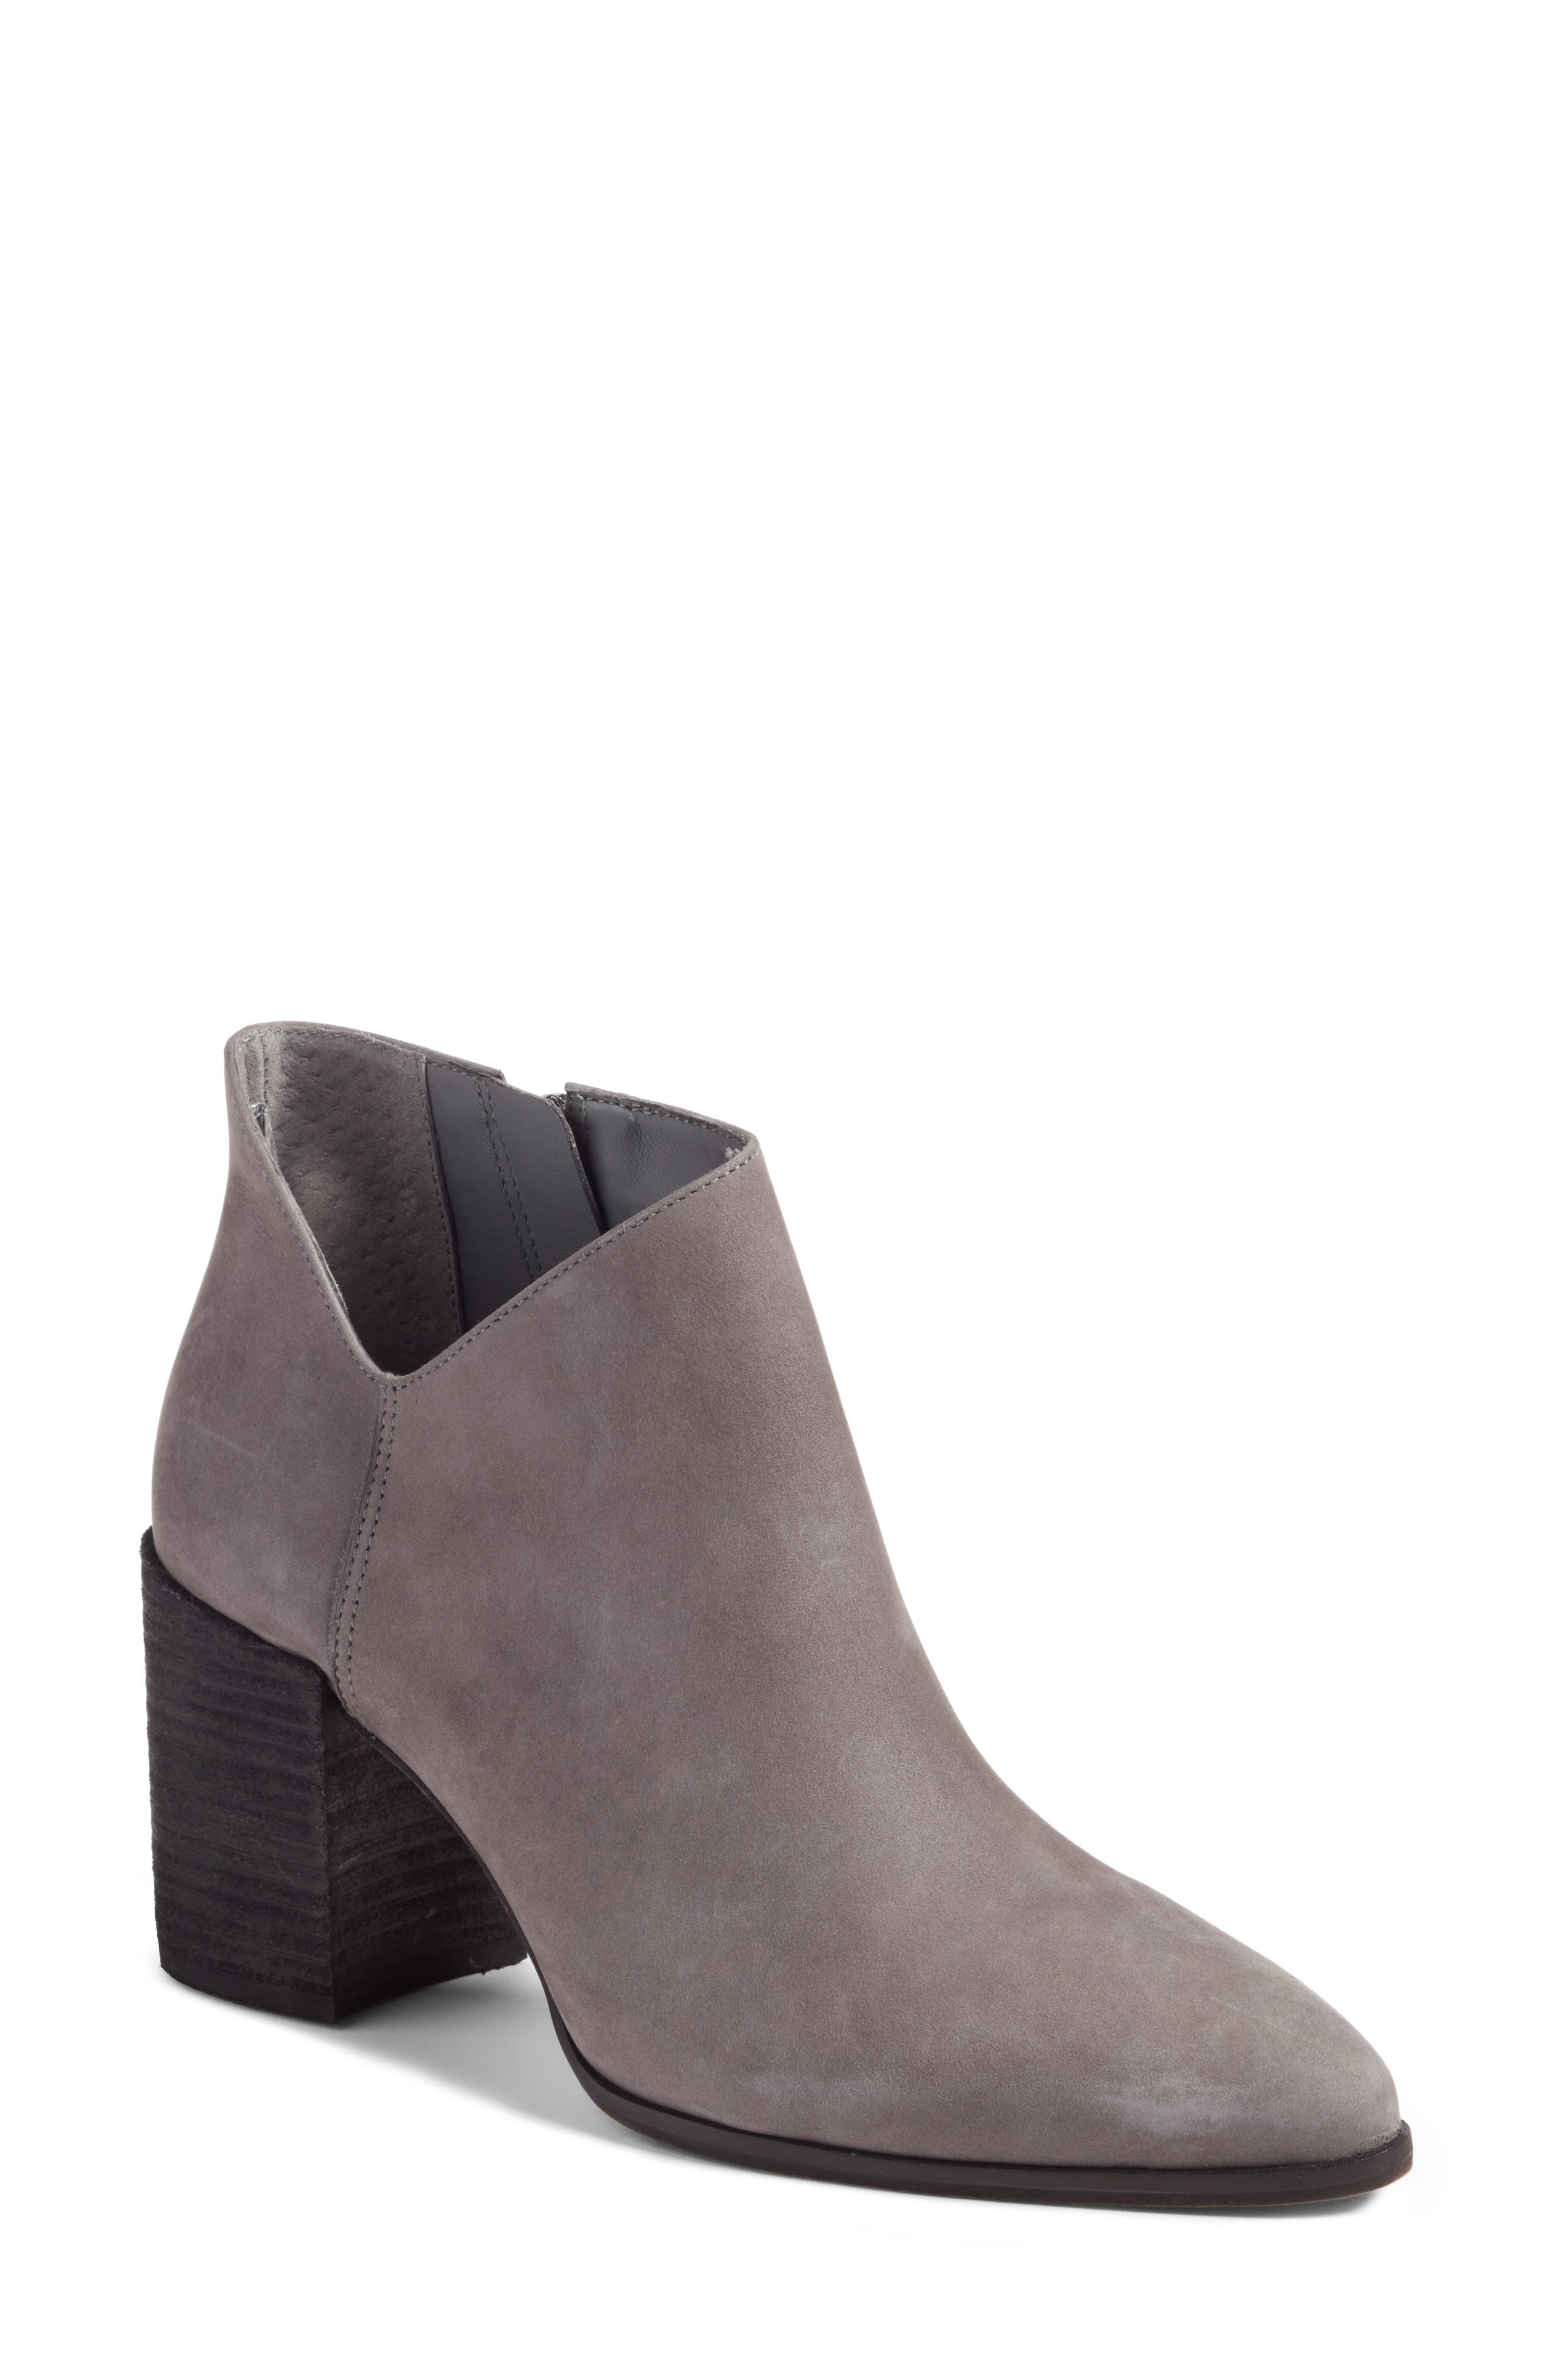 vince camuto boots nordstrom rack